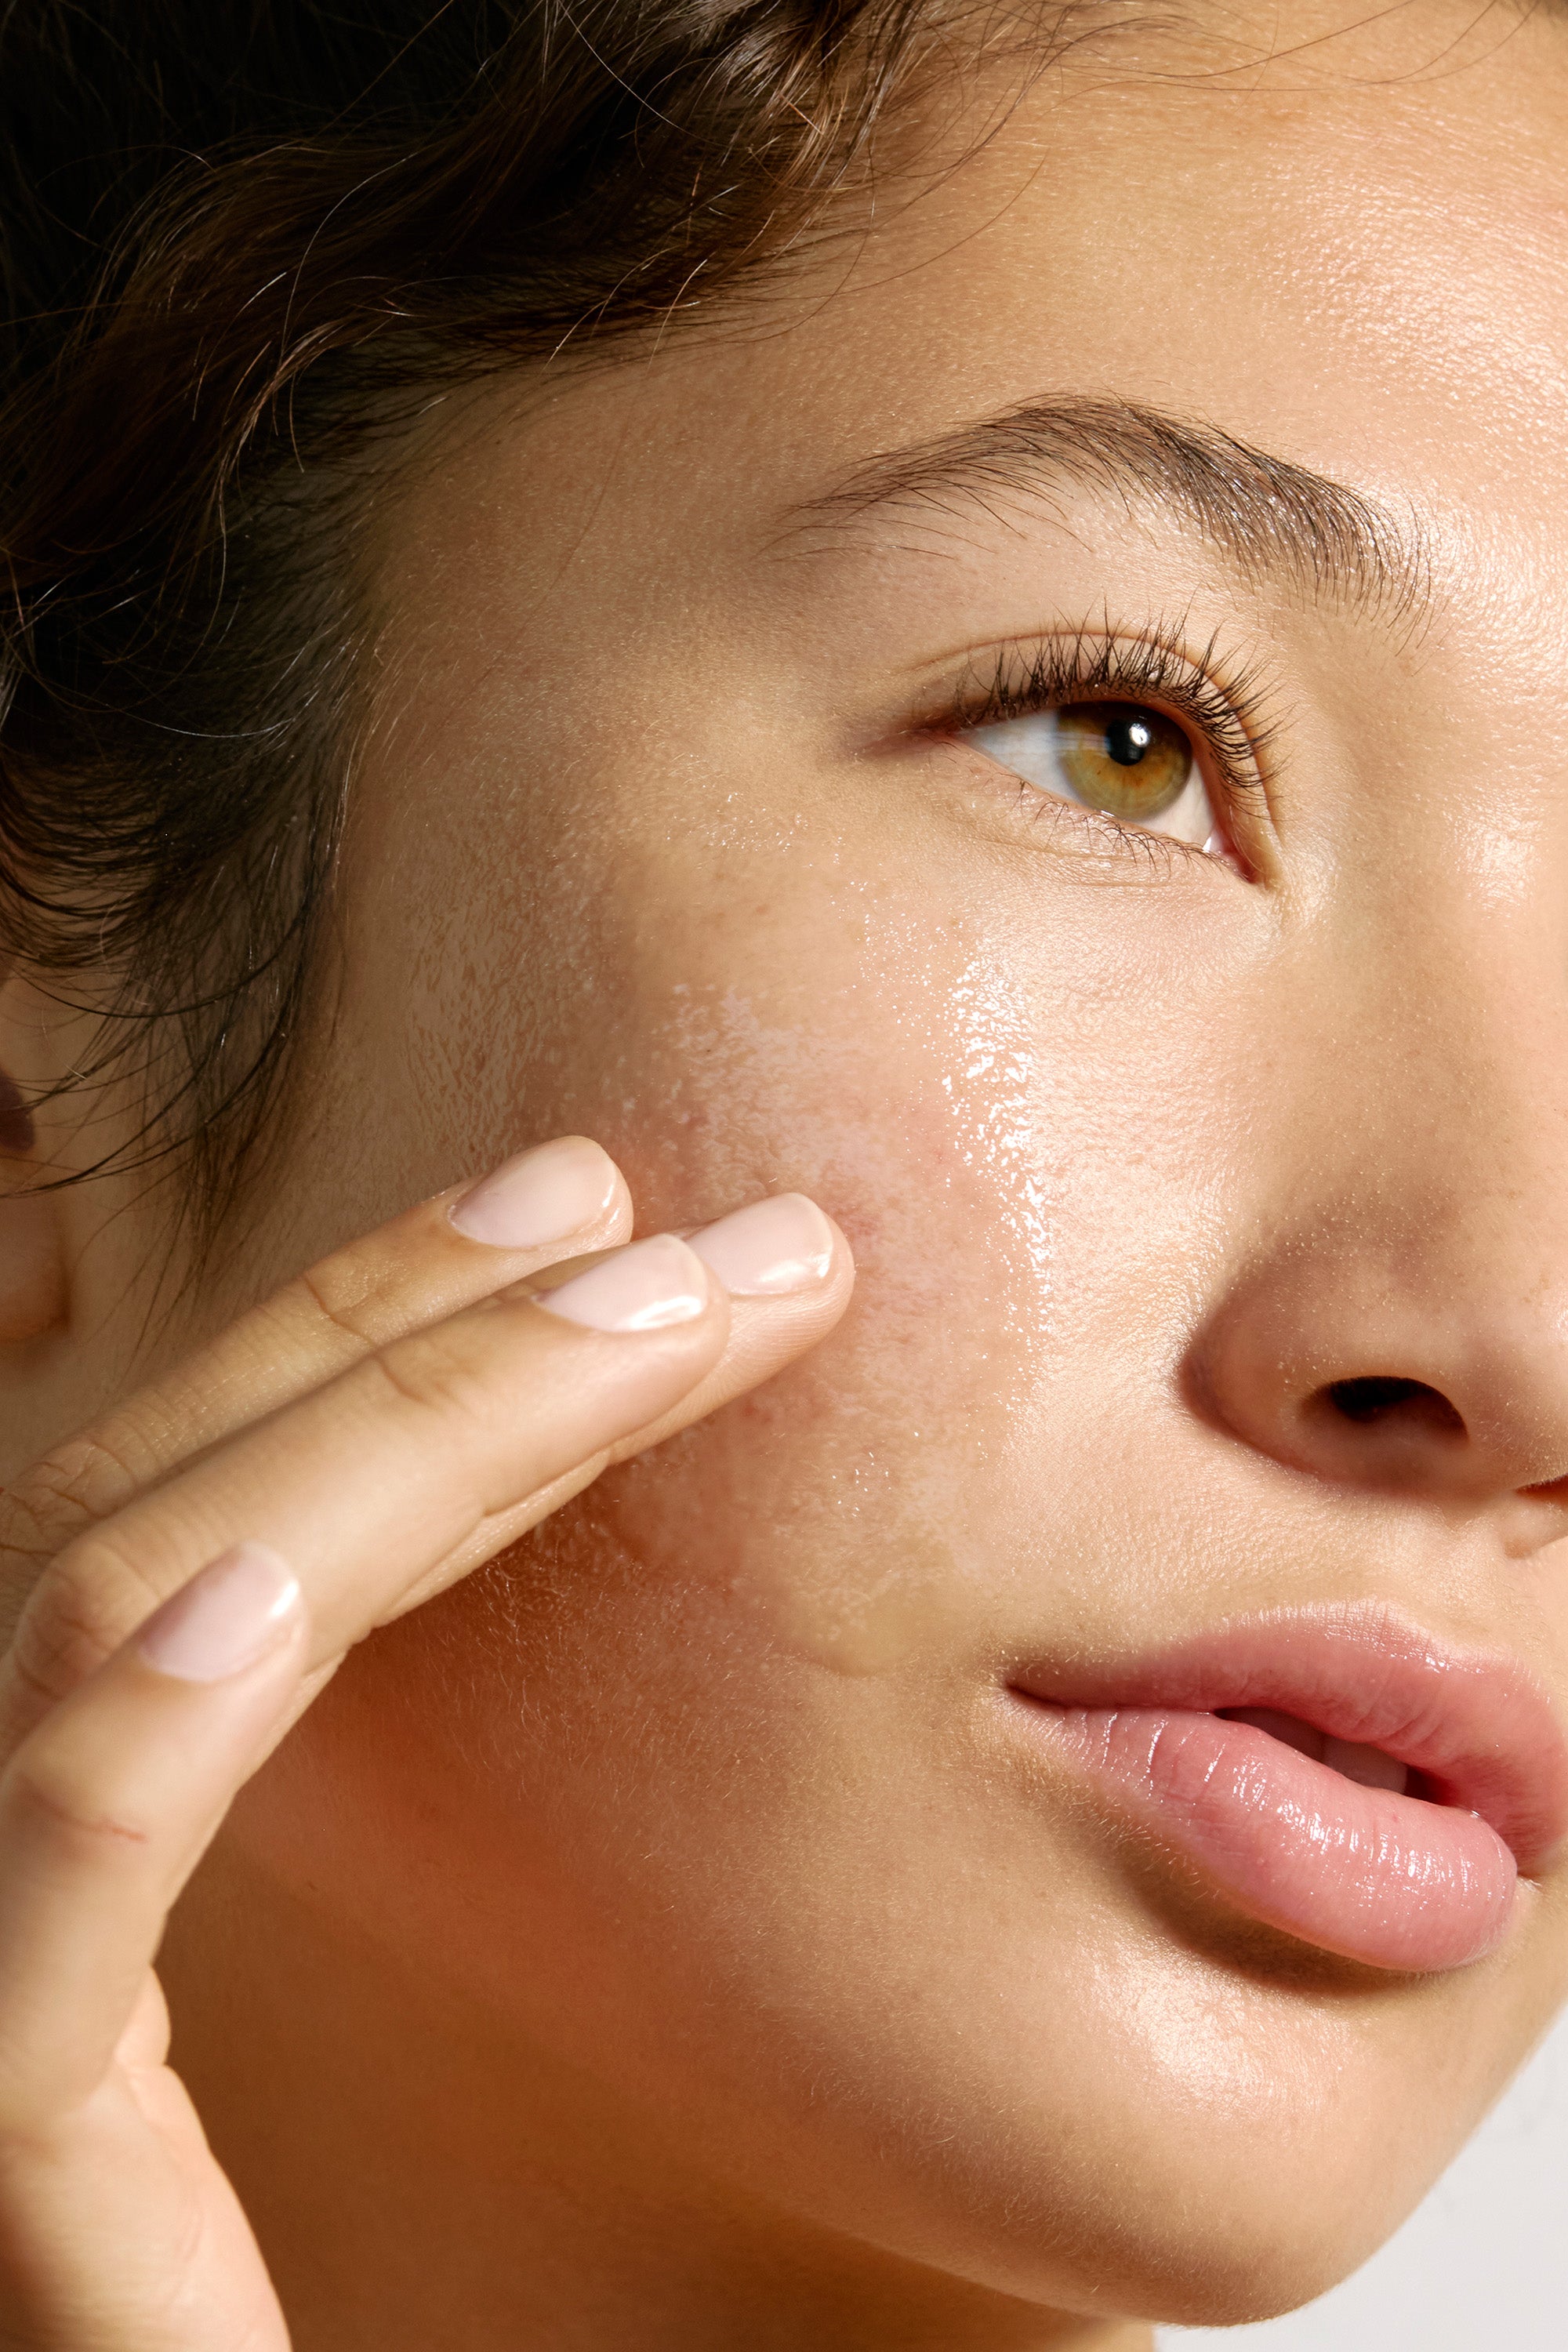 Close-up of a person applying Deeper Dive Moisturizer from Freaks of Nature Skincare to their cheek. The image highlights the person's smooth, dewy skin, focusing on their fingers gently massaging the microbiome-balancing product in a circular motion. Their expression is calm and relaxed.